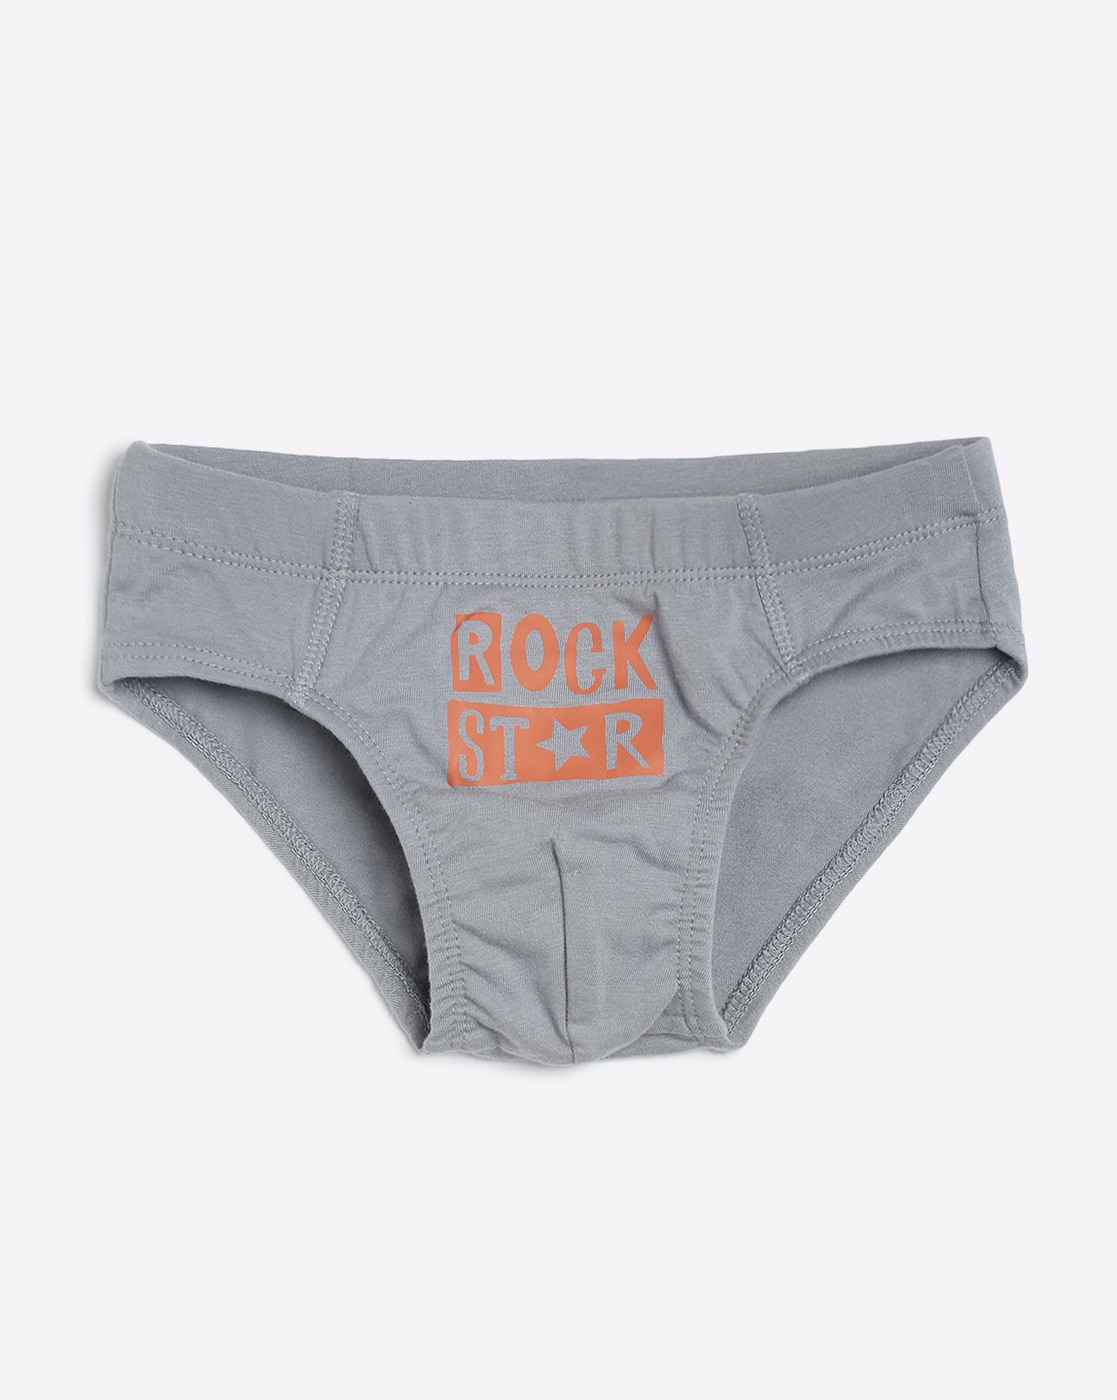 Kids Panties at best price in Tiruppur by All Win Apparel